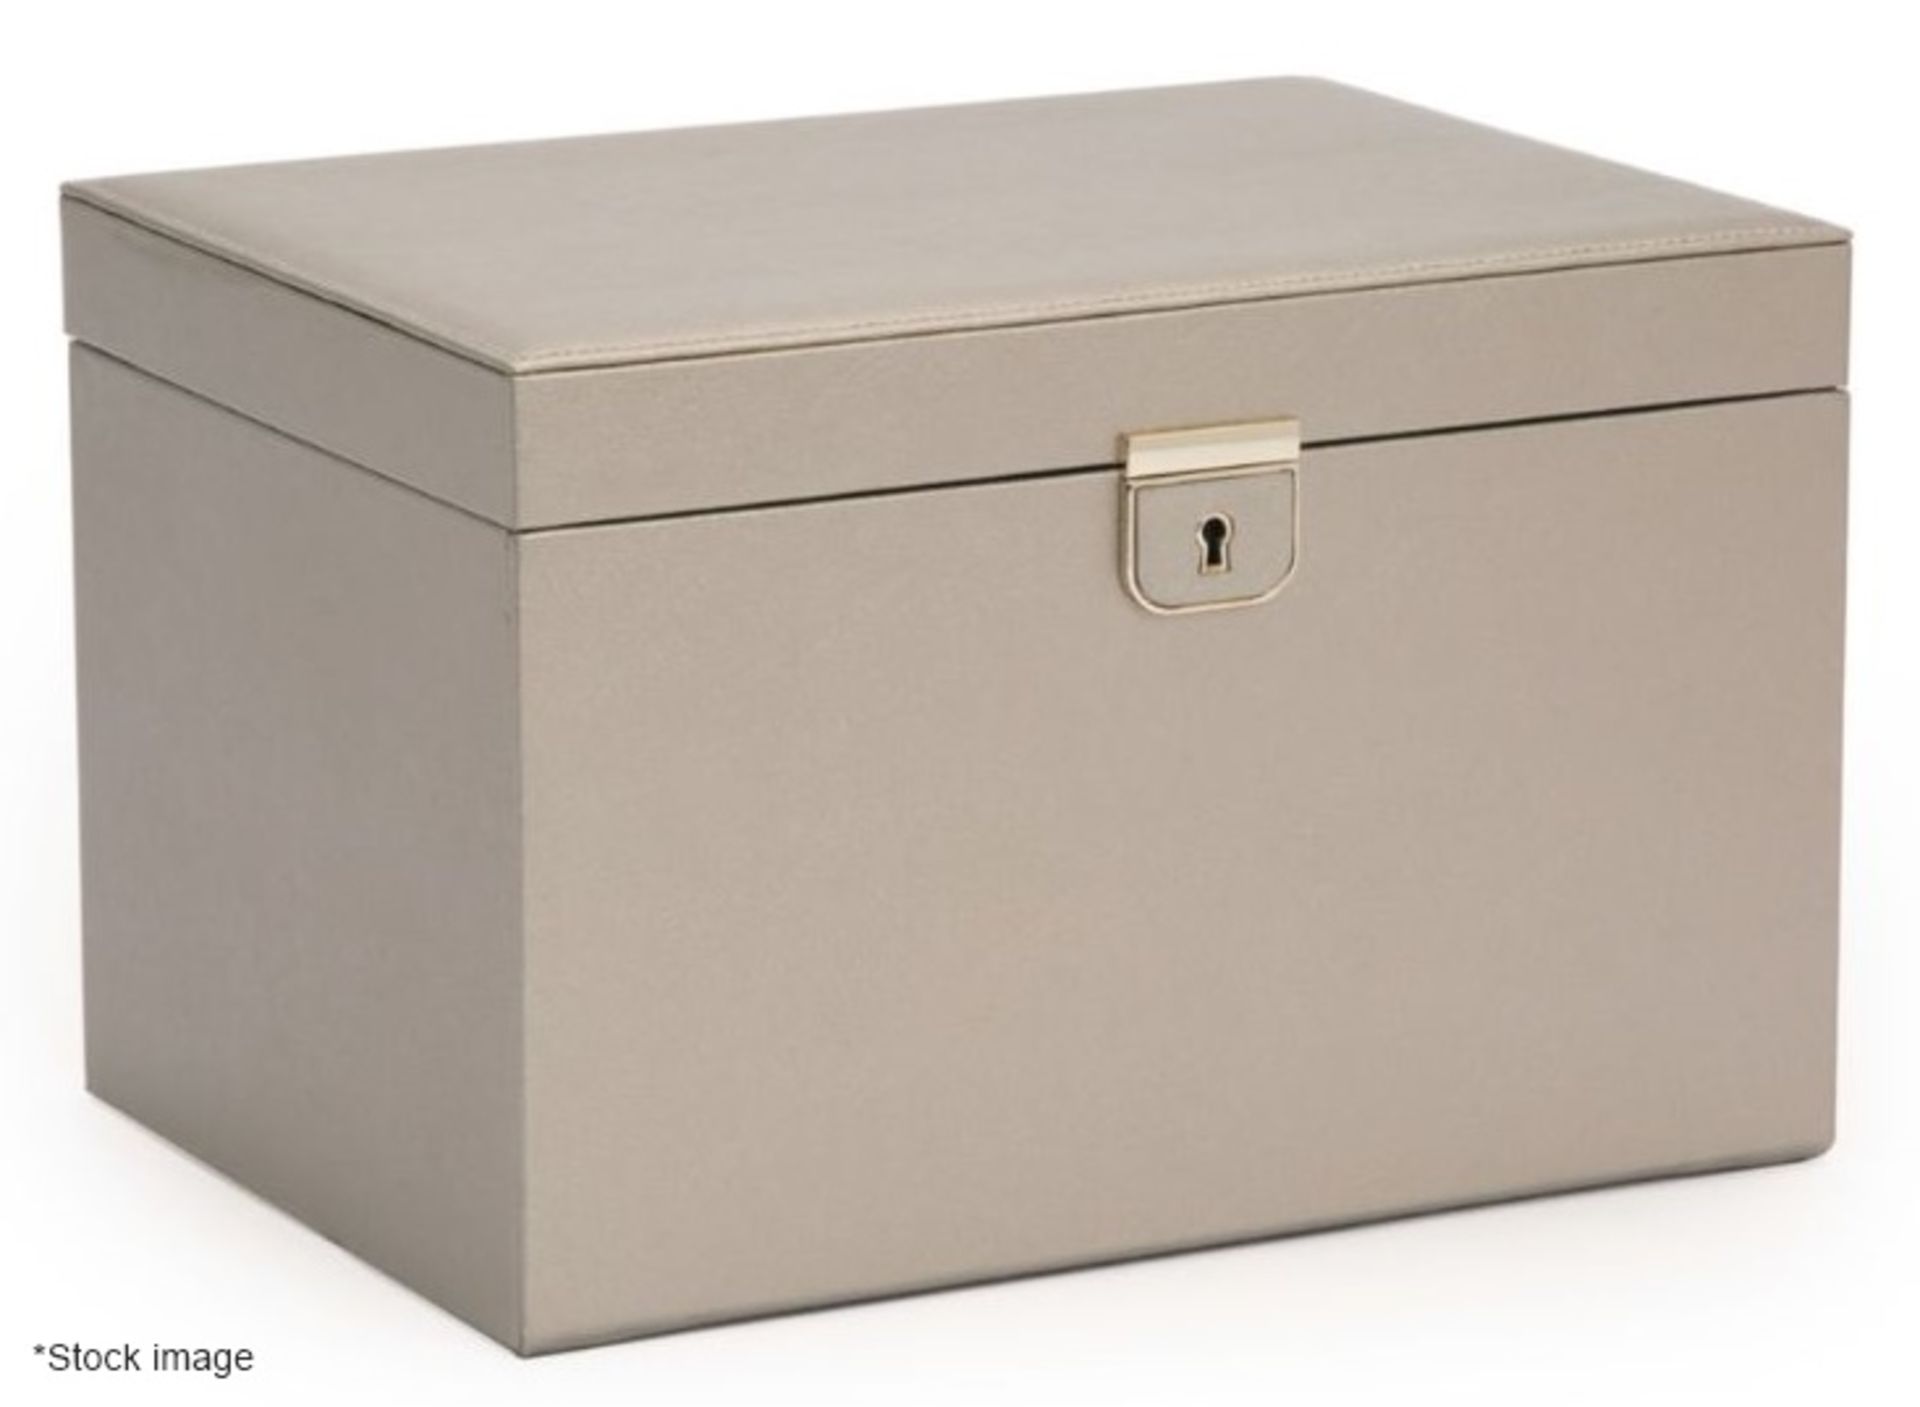 1 x WOLF 'Palermo' Large Luxury Leather Jewellery Box, With A Pewter Finish - Original Price £475.00 - Image 3 of 18